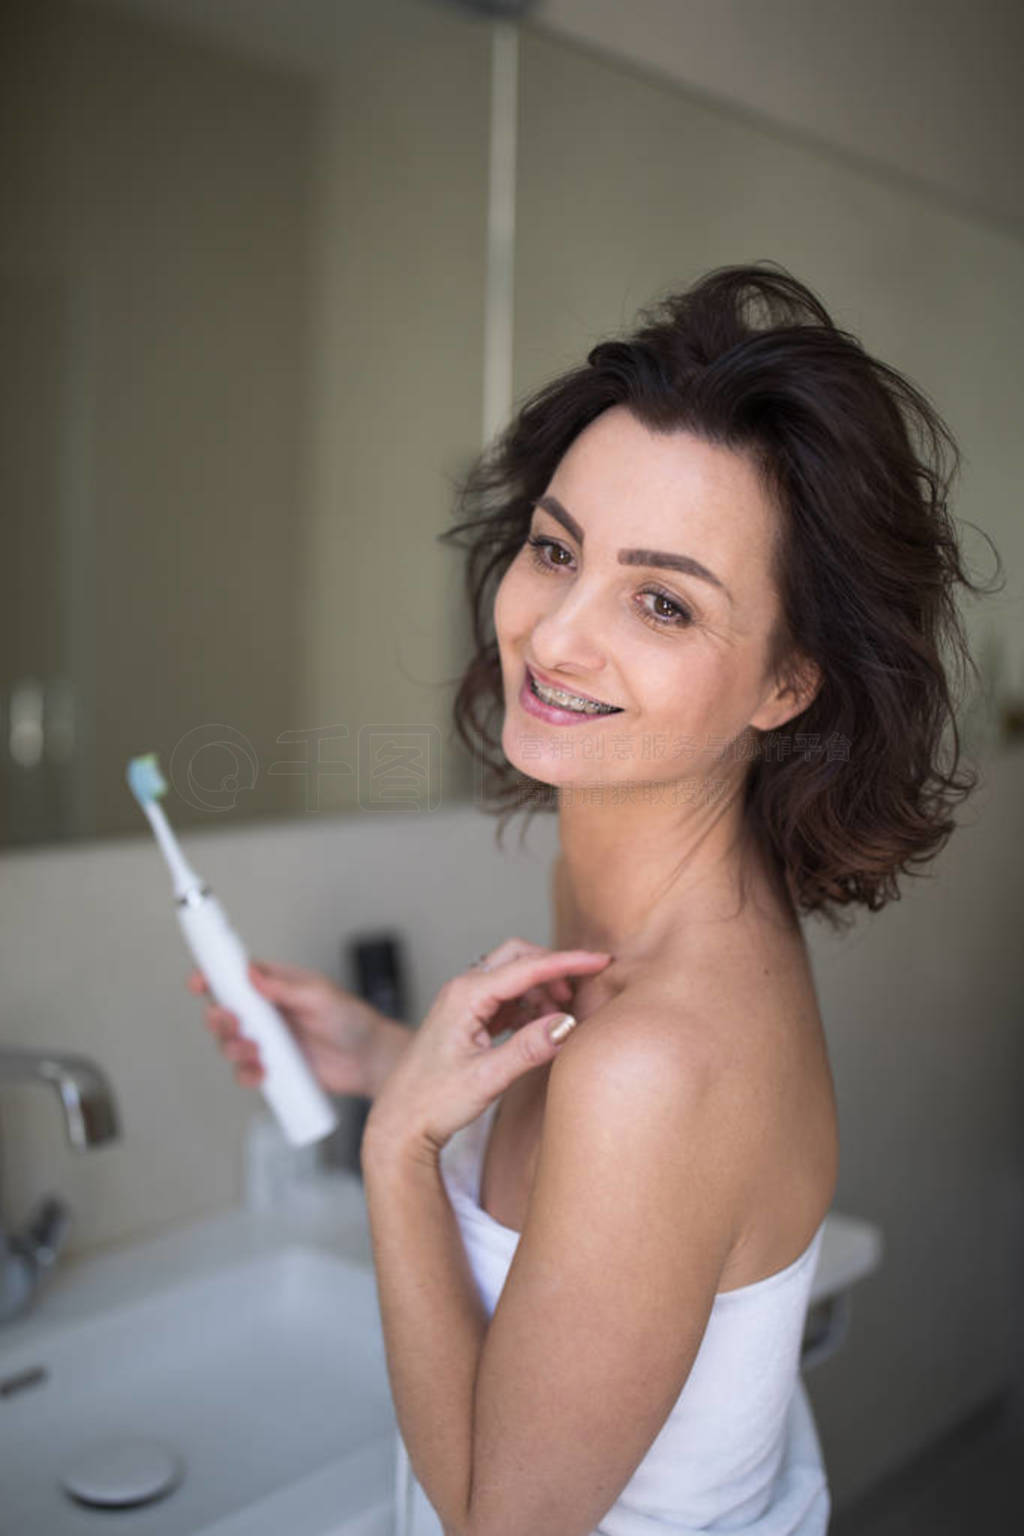 Pretty, middle aged woman brushing her teeth